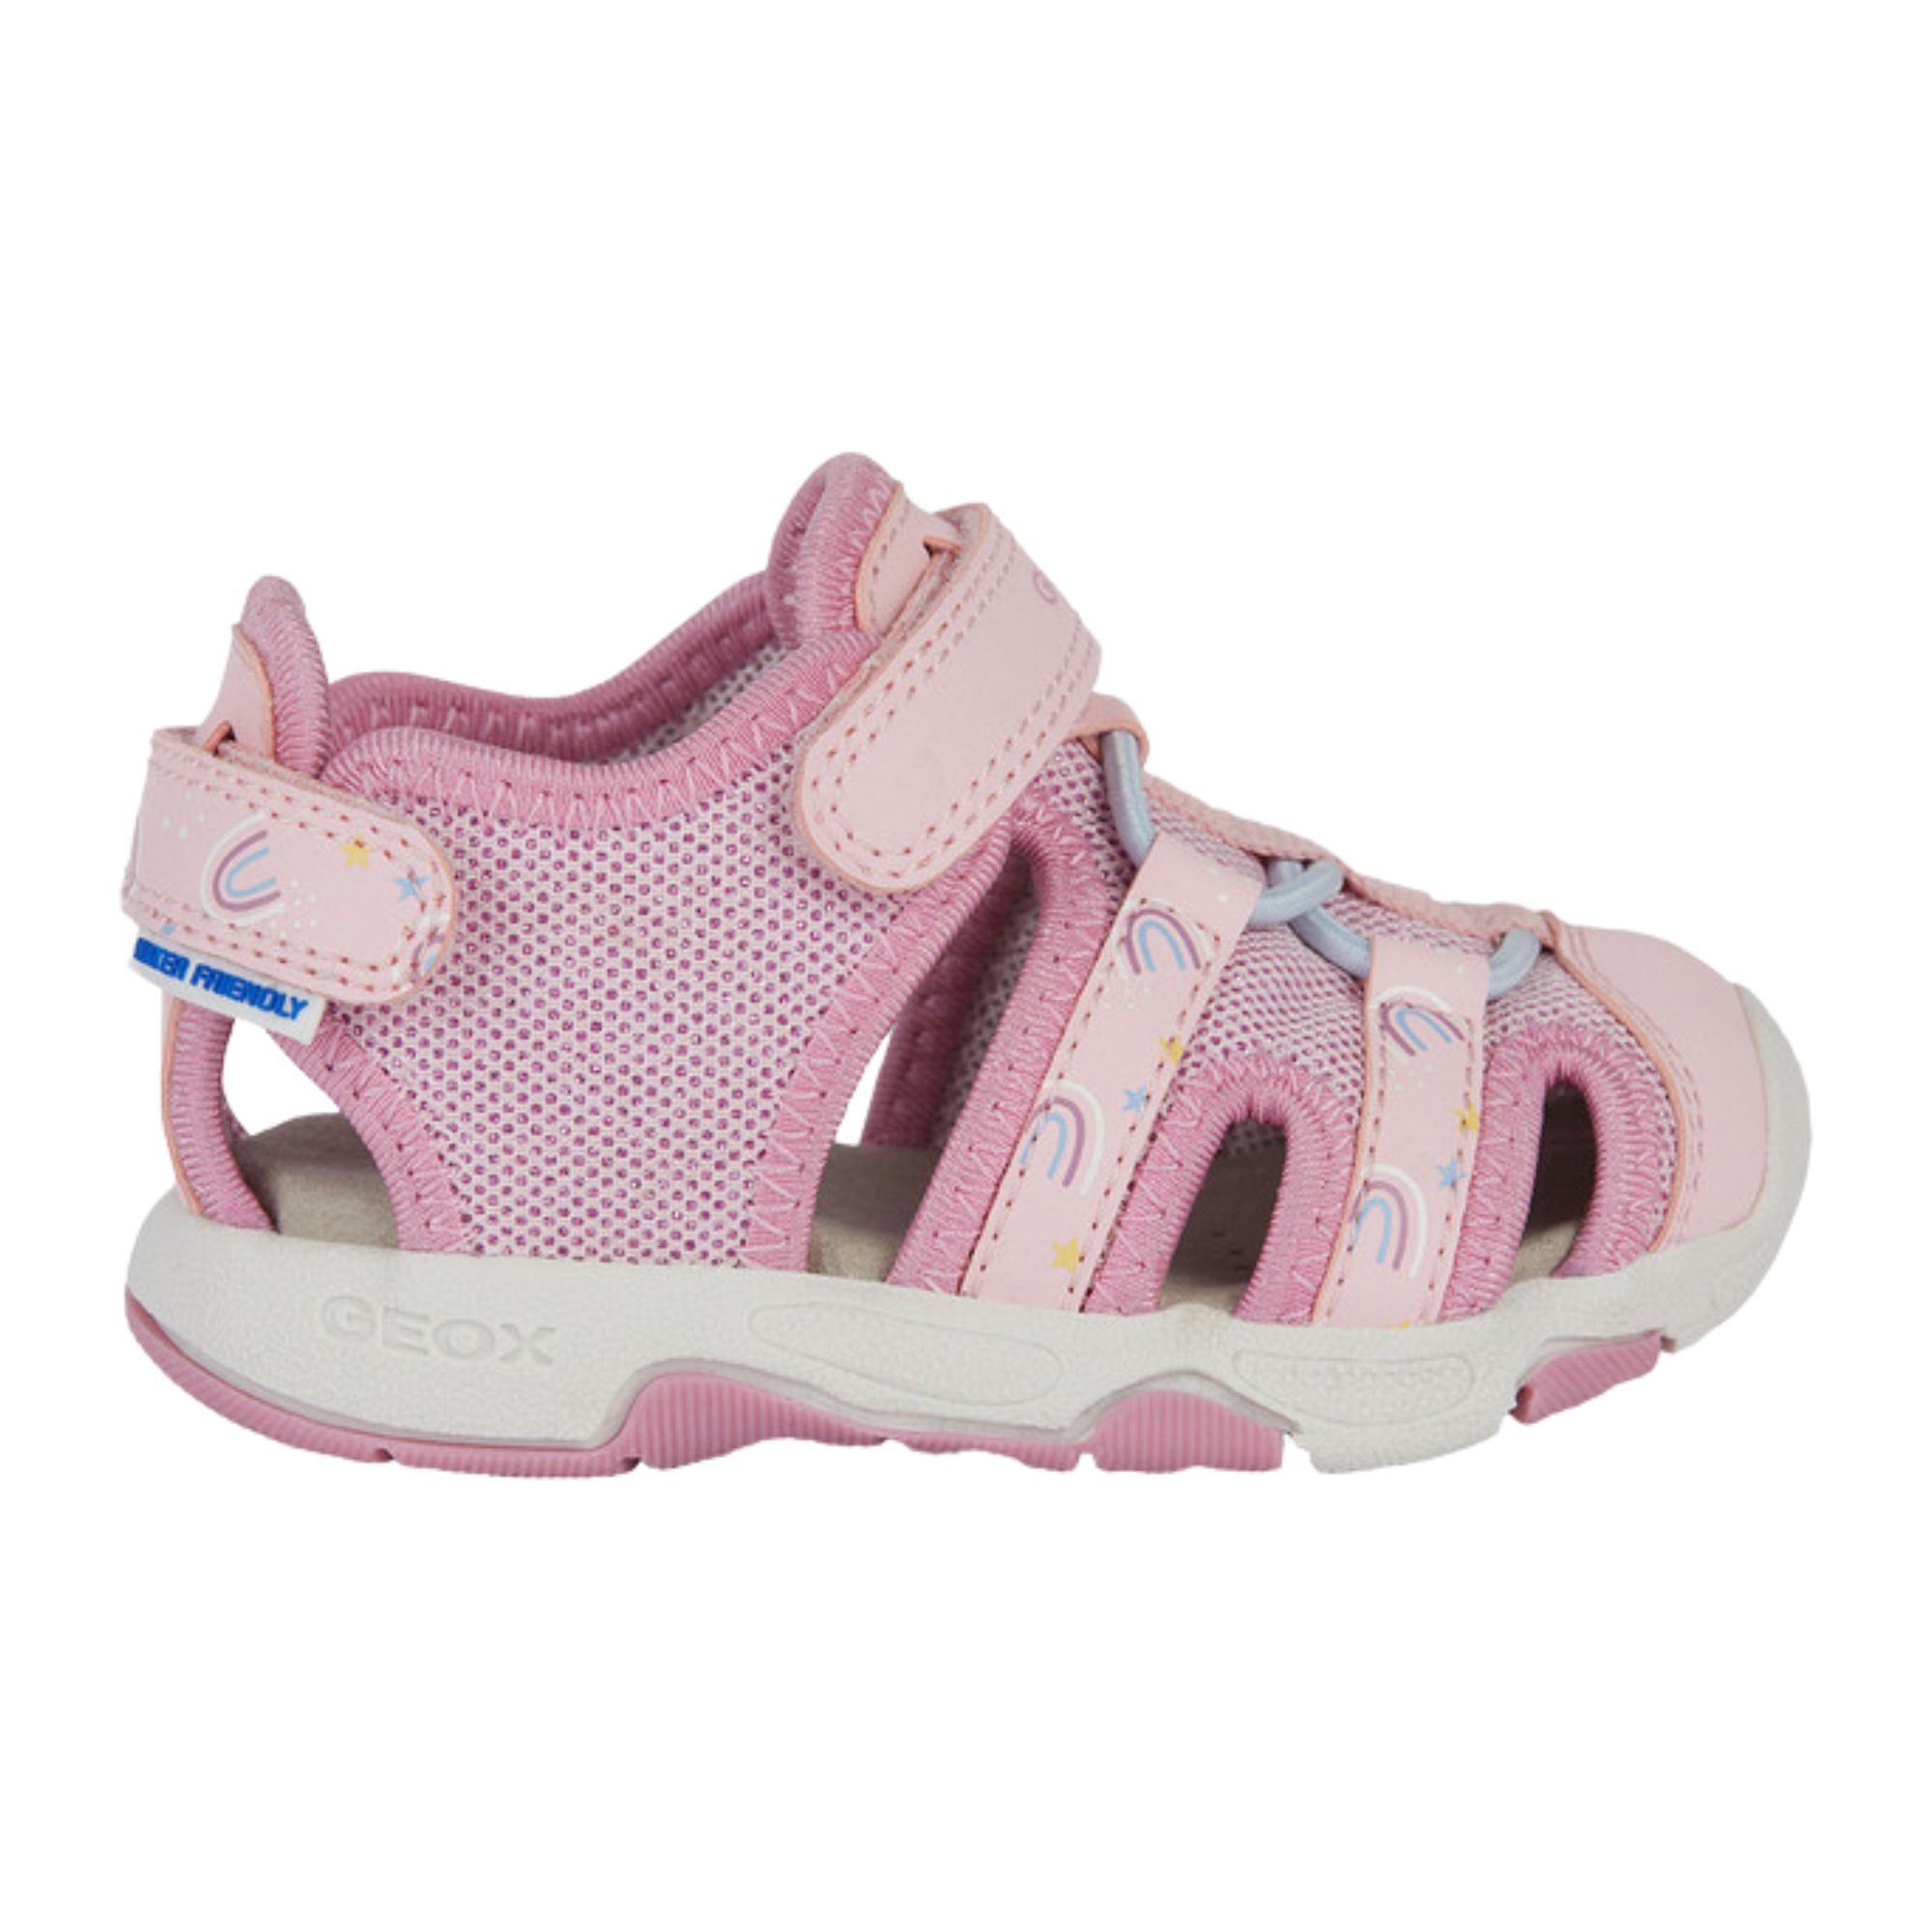 Geox Baby Girl Multy Toddler Pink Sandals